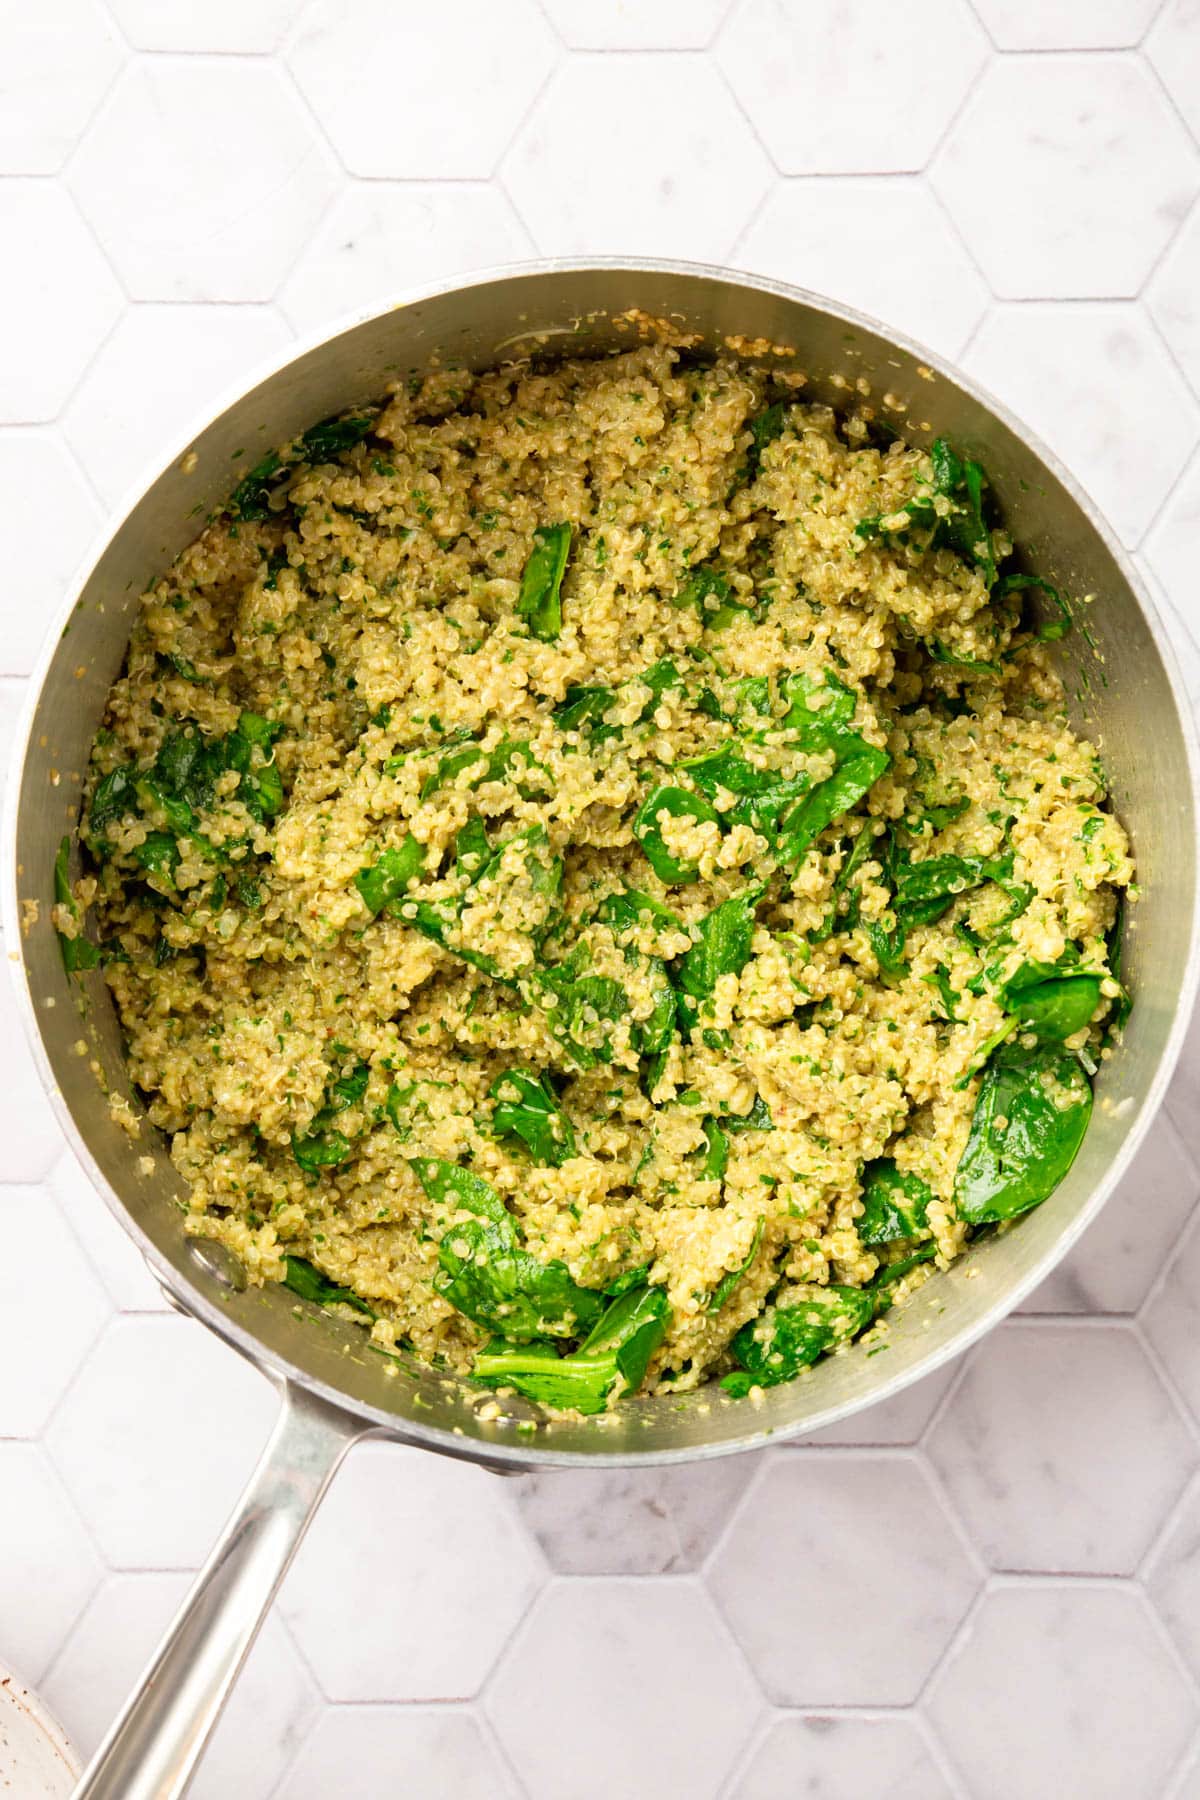 A stainless steel pot filled with quinoa mixed with spinach and pesto.